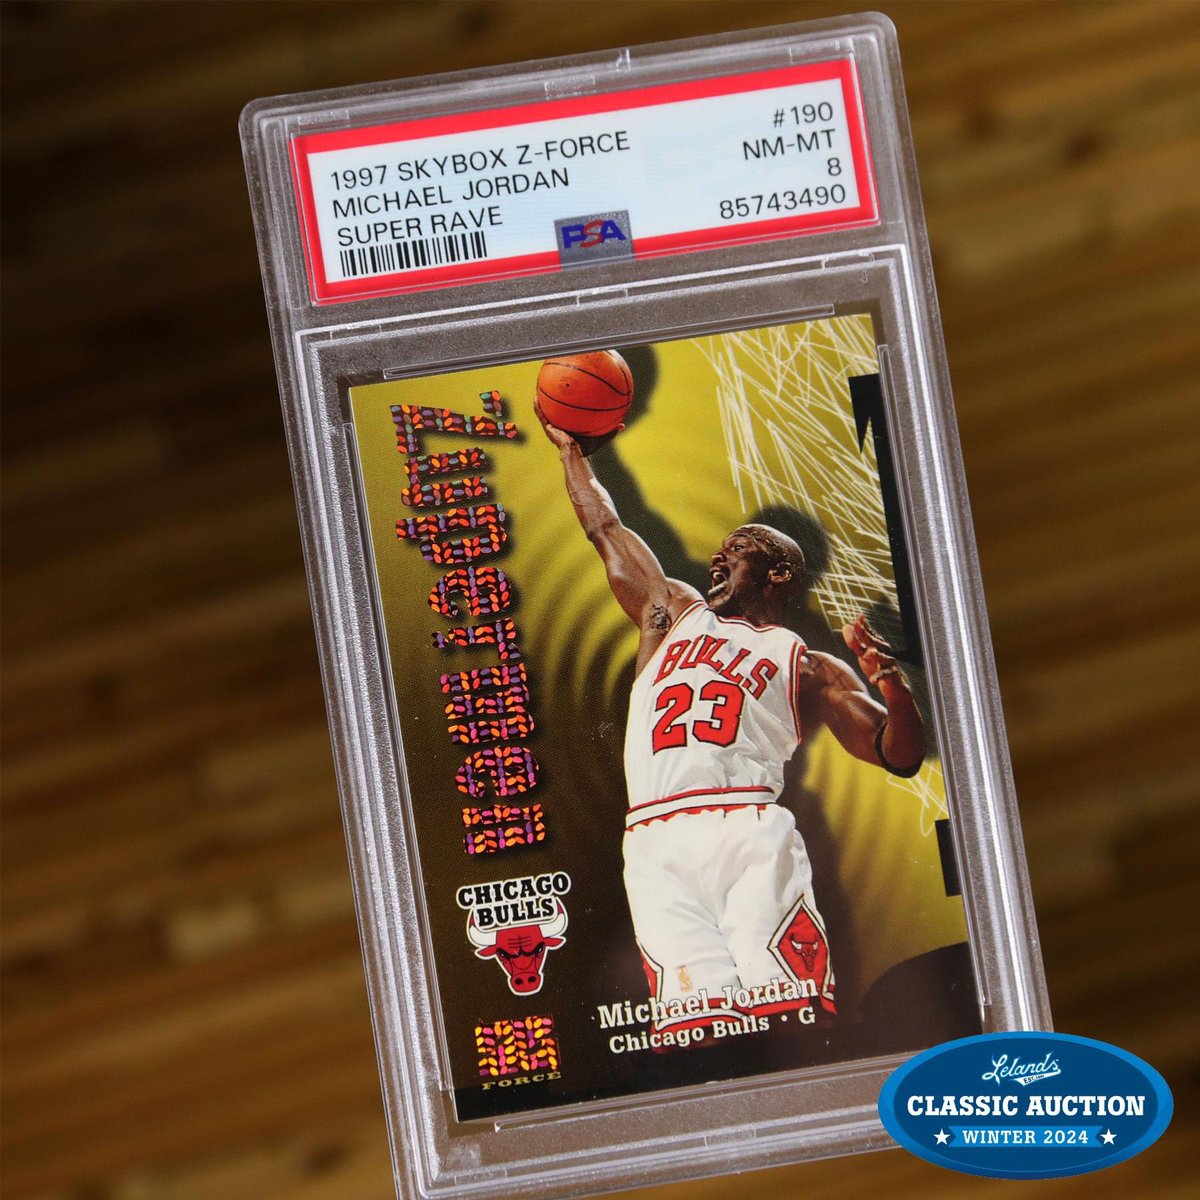 🏀 Sneak Peek Alert! Opening Sunday in the Winter Classic is a 1997-1998 SkyBox Z-Force Basketball Super Rave #190 Michael Jordan #8/50 PSA NM-MT 8. Get ready to place your bids on Air Jordan and other basketball icons starting Feb 25th. lelands.com/winter-classic…